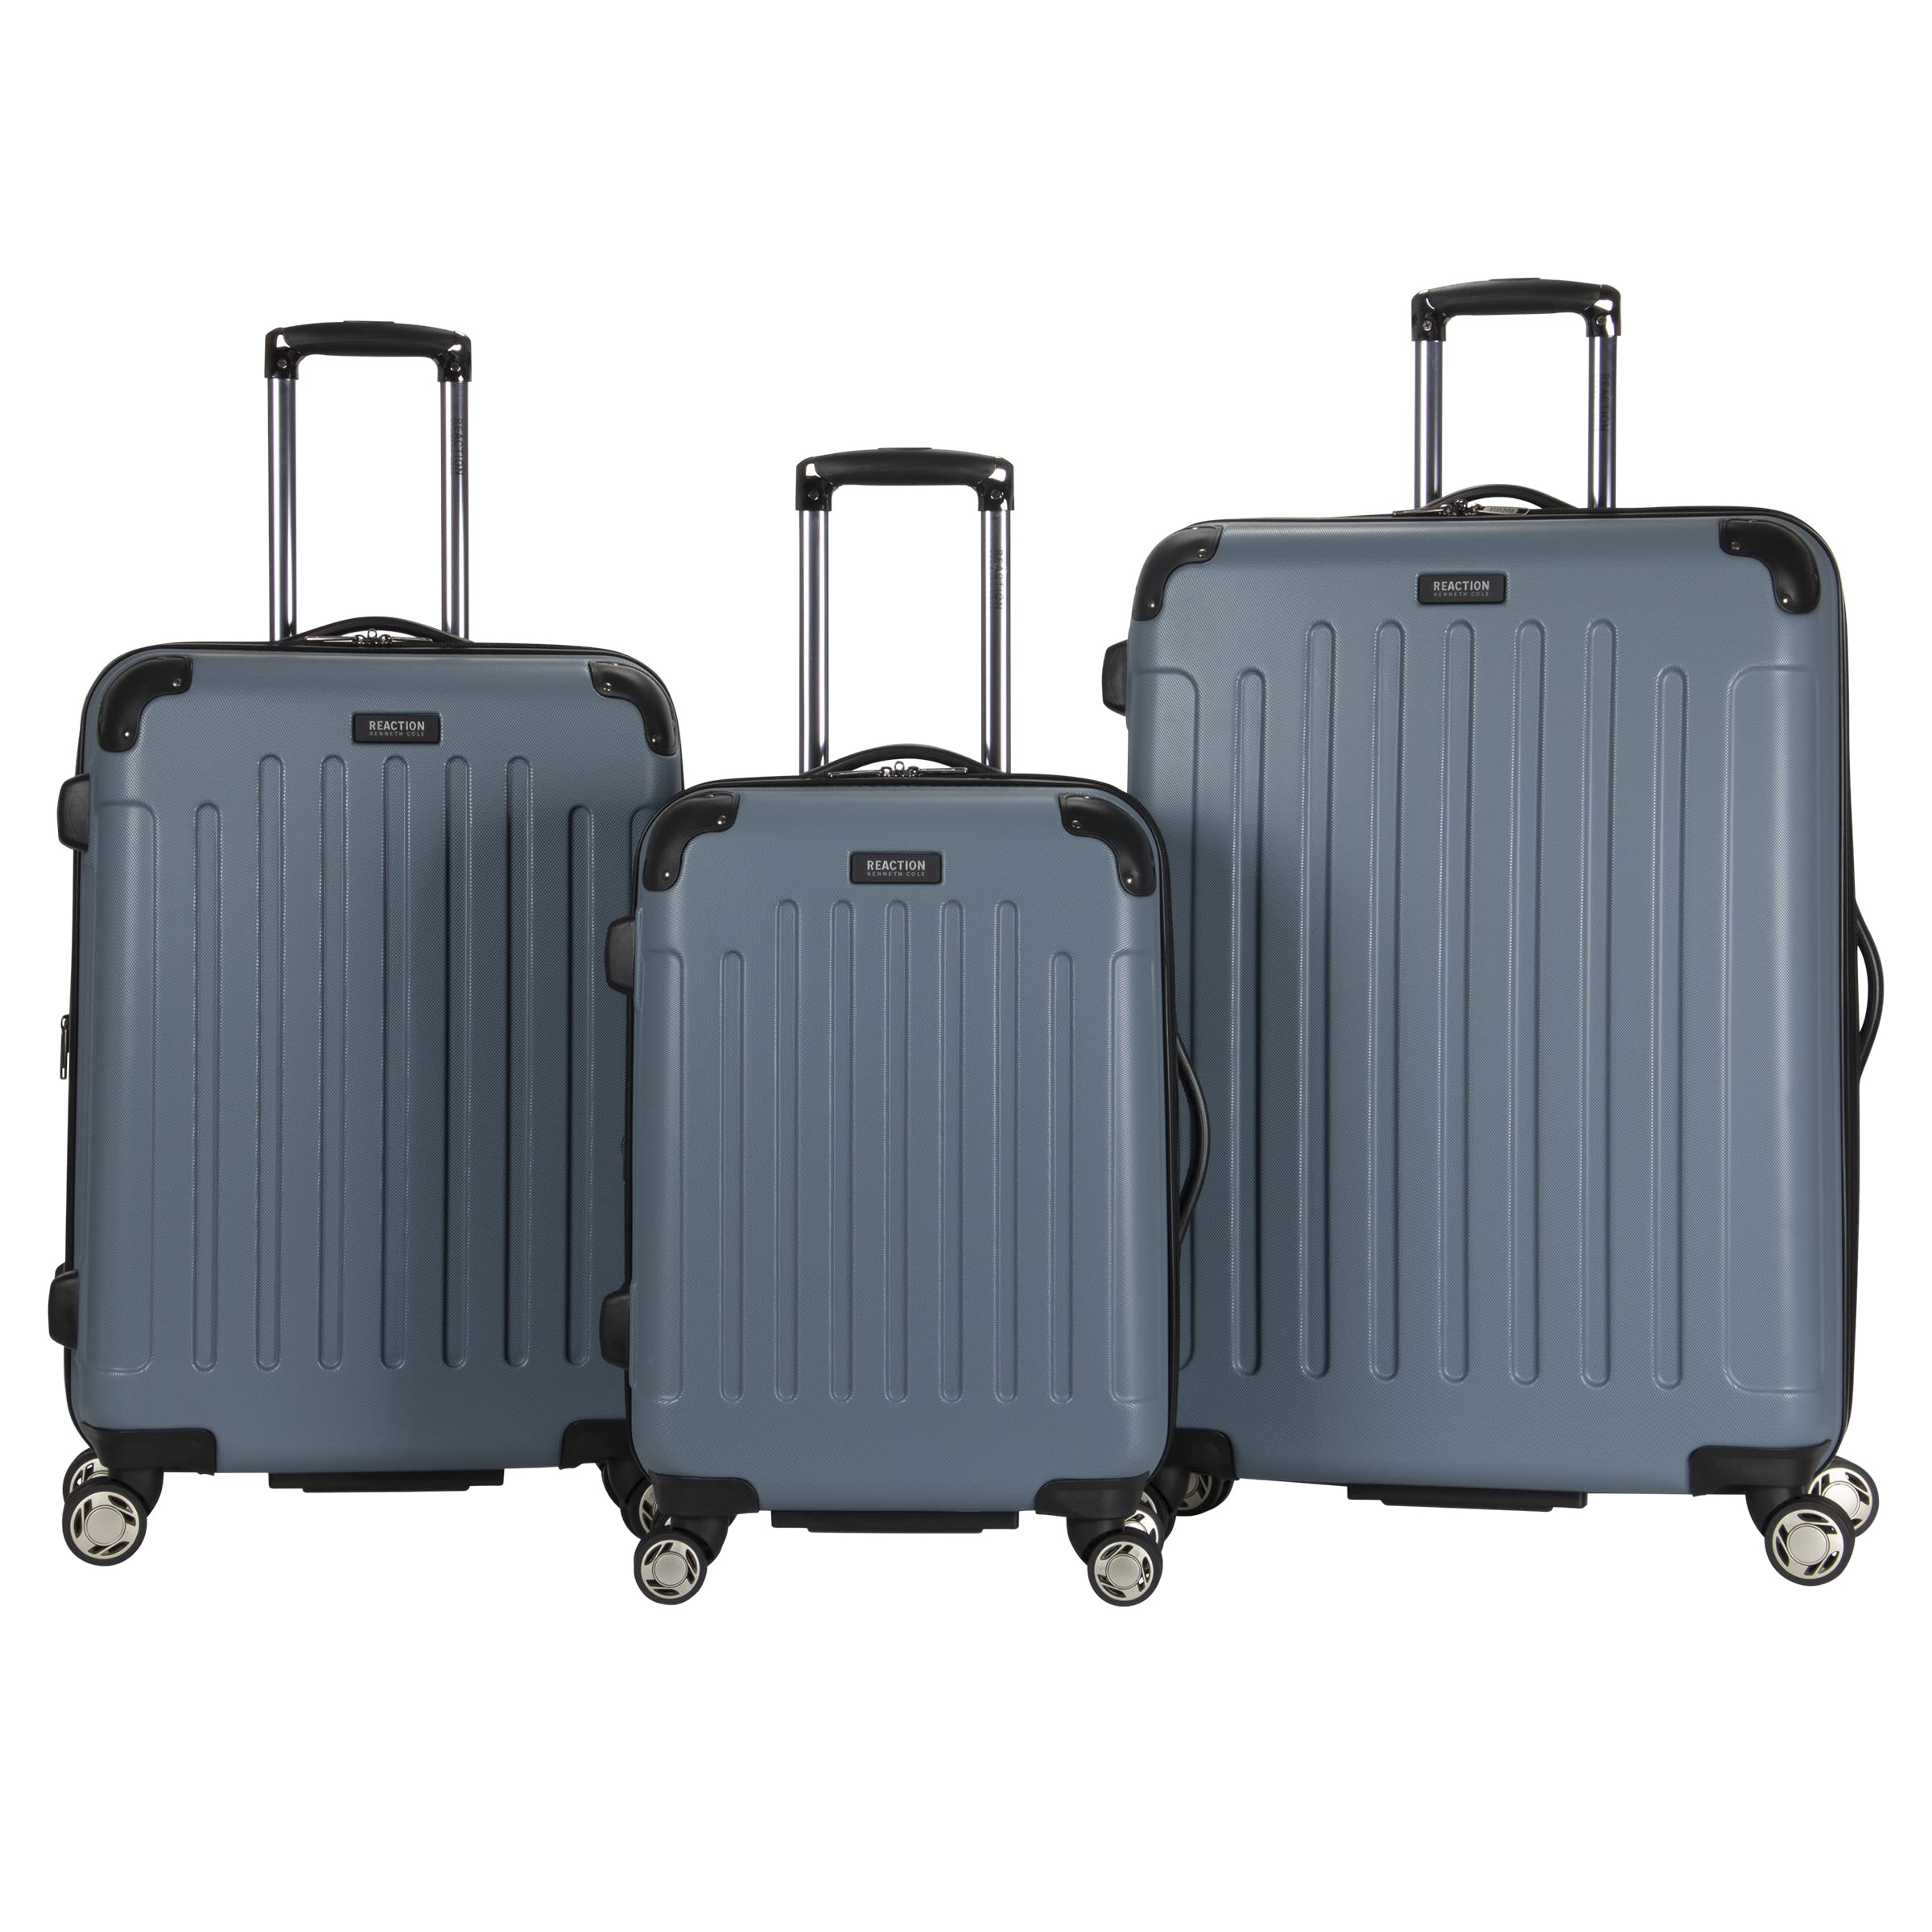 This Kenneth Cole Luggage Set Is on Sale at